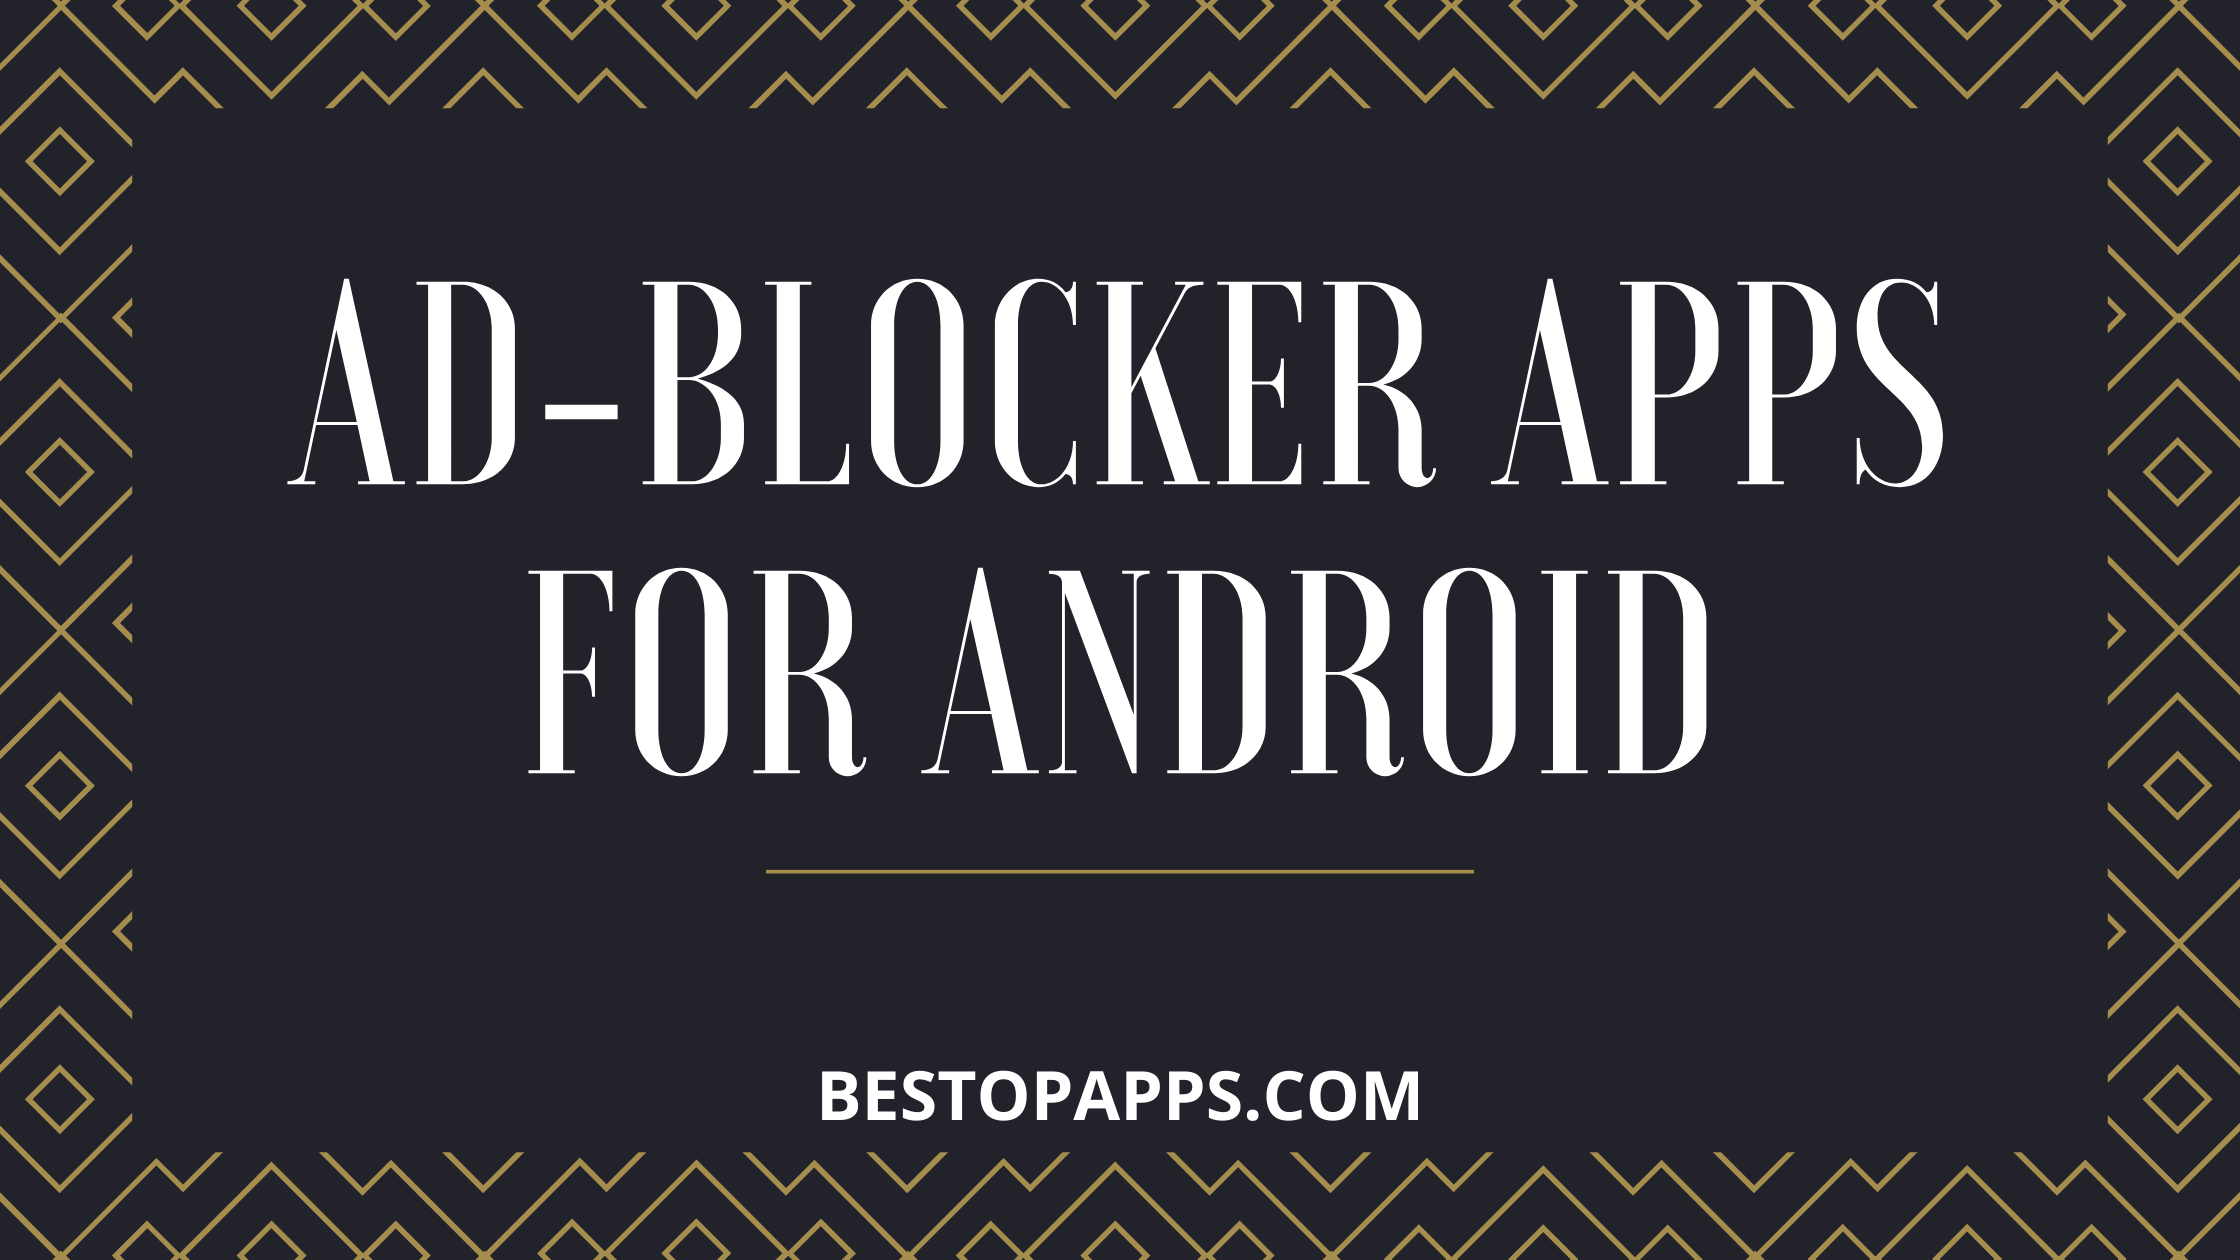 ADBlocker Apps for Android